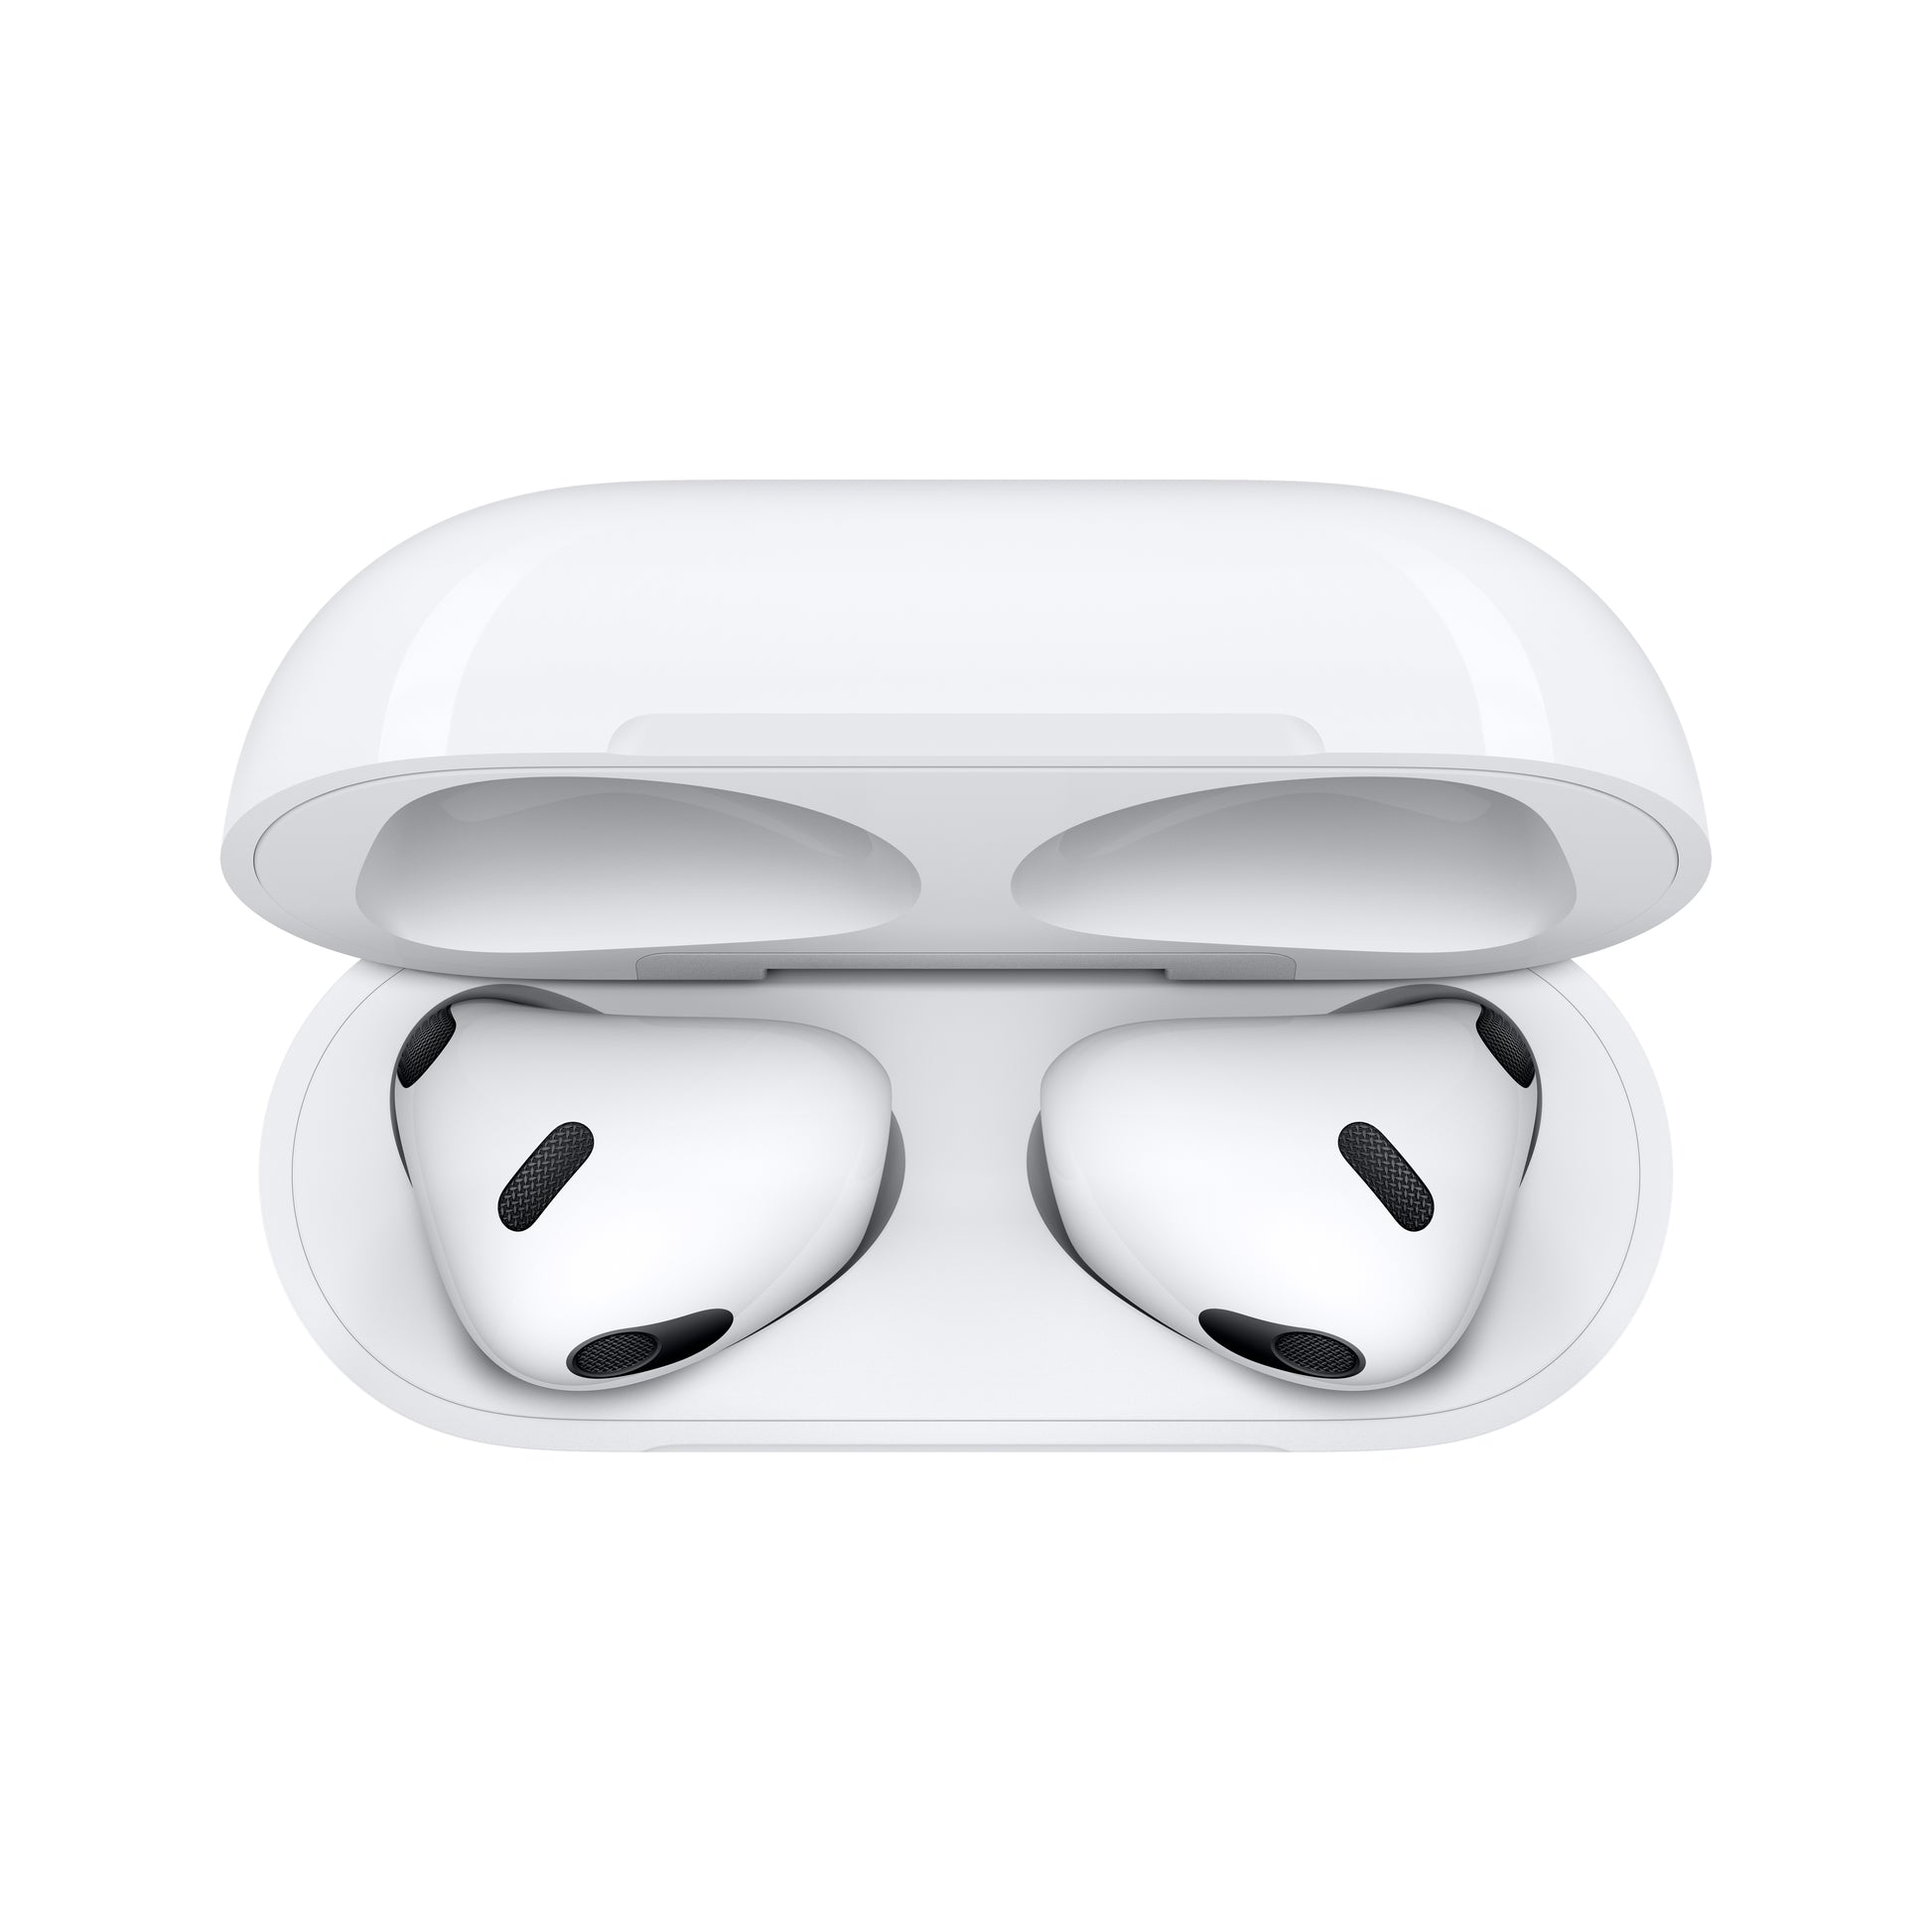 Apple AirPods | 3rd generation with Lightning Charging Case